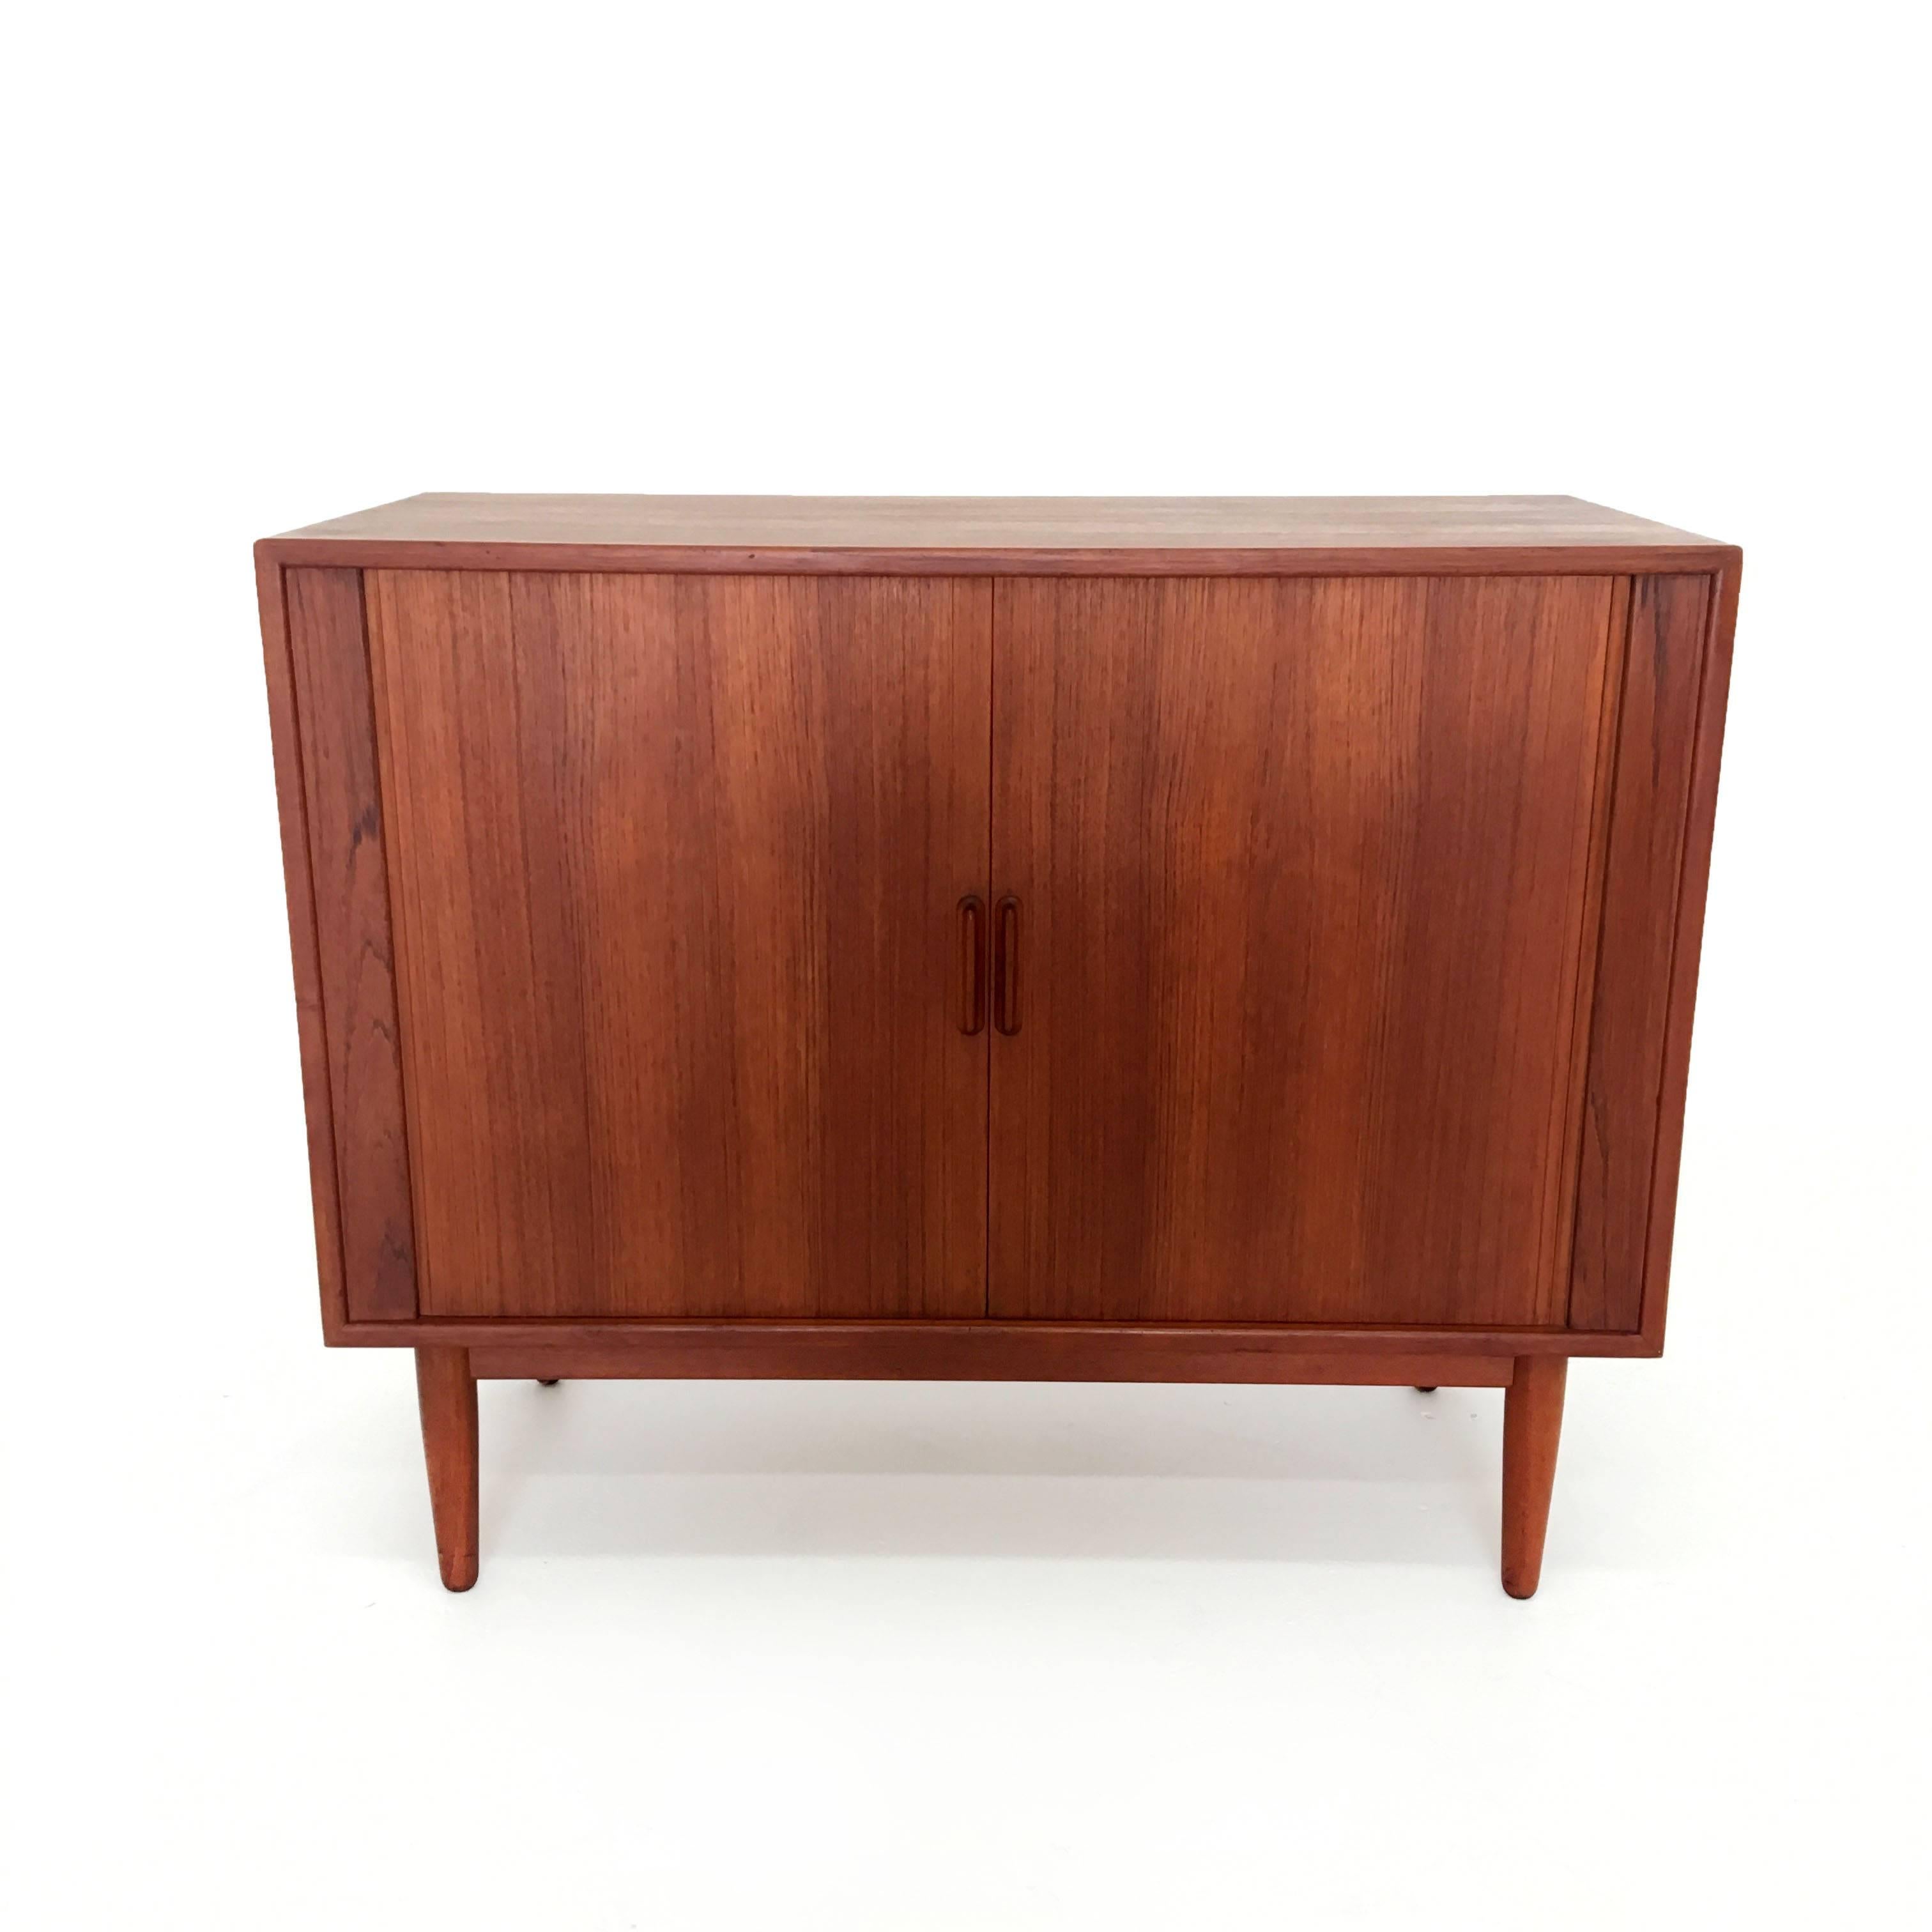 Danish modern bar cabinet with sliding tambour doors. 
Great condition with minimal age appropriate wear.